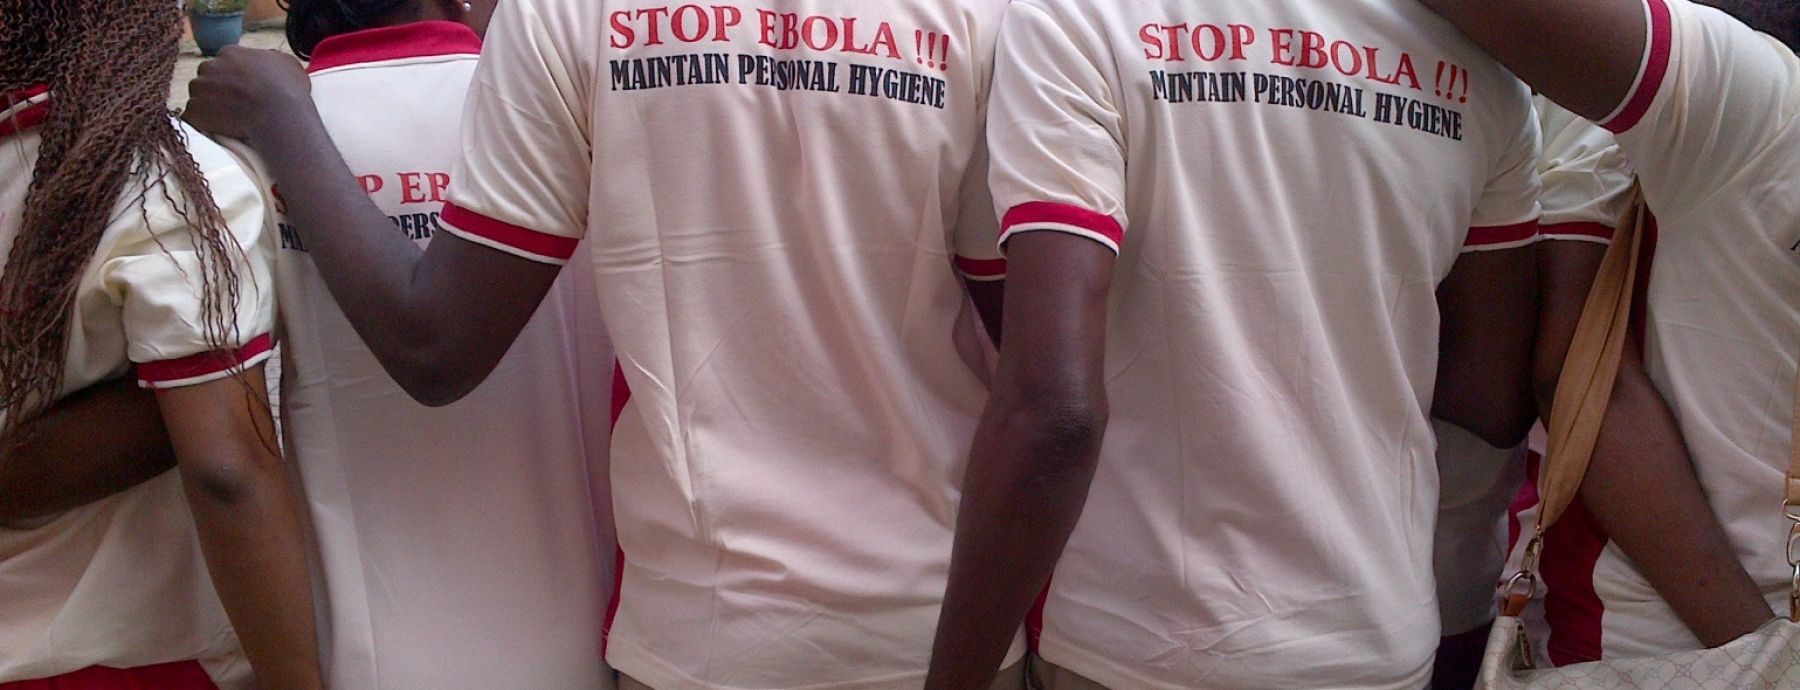 Lessons from Ebola